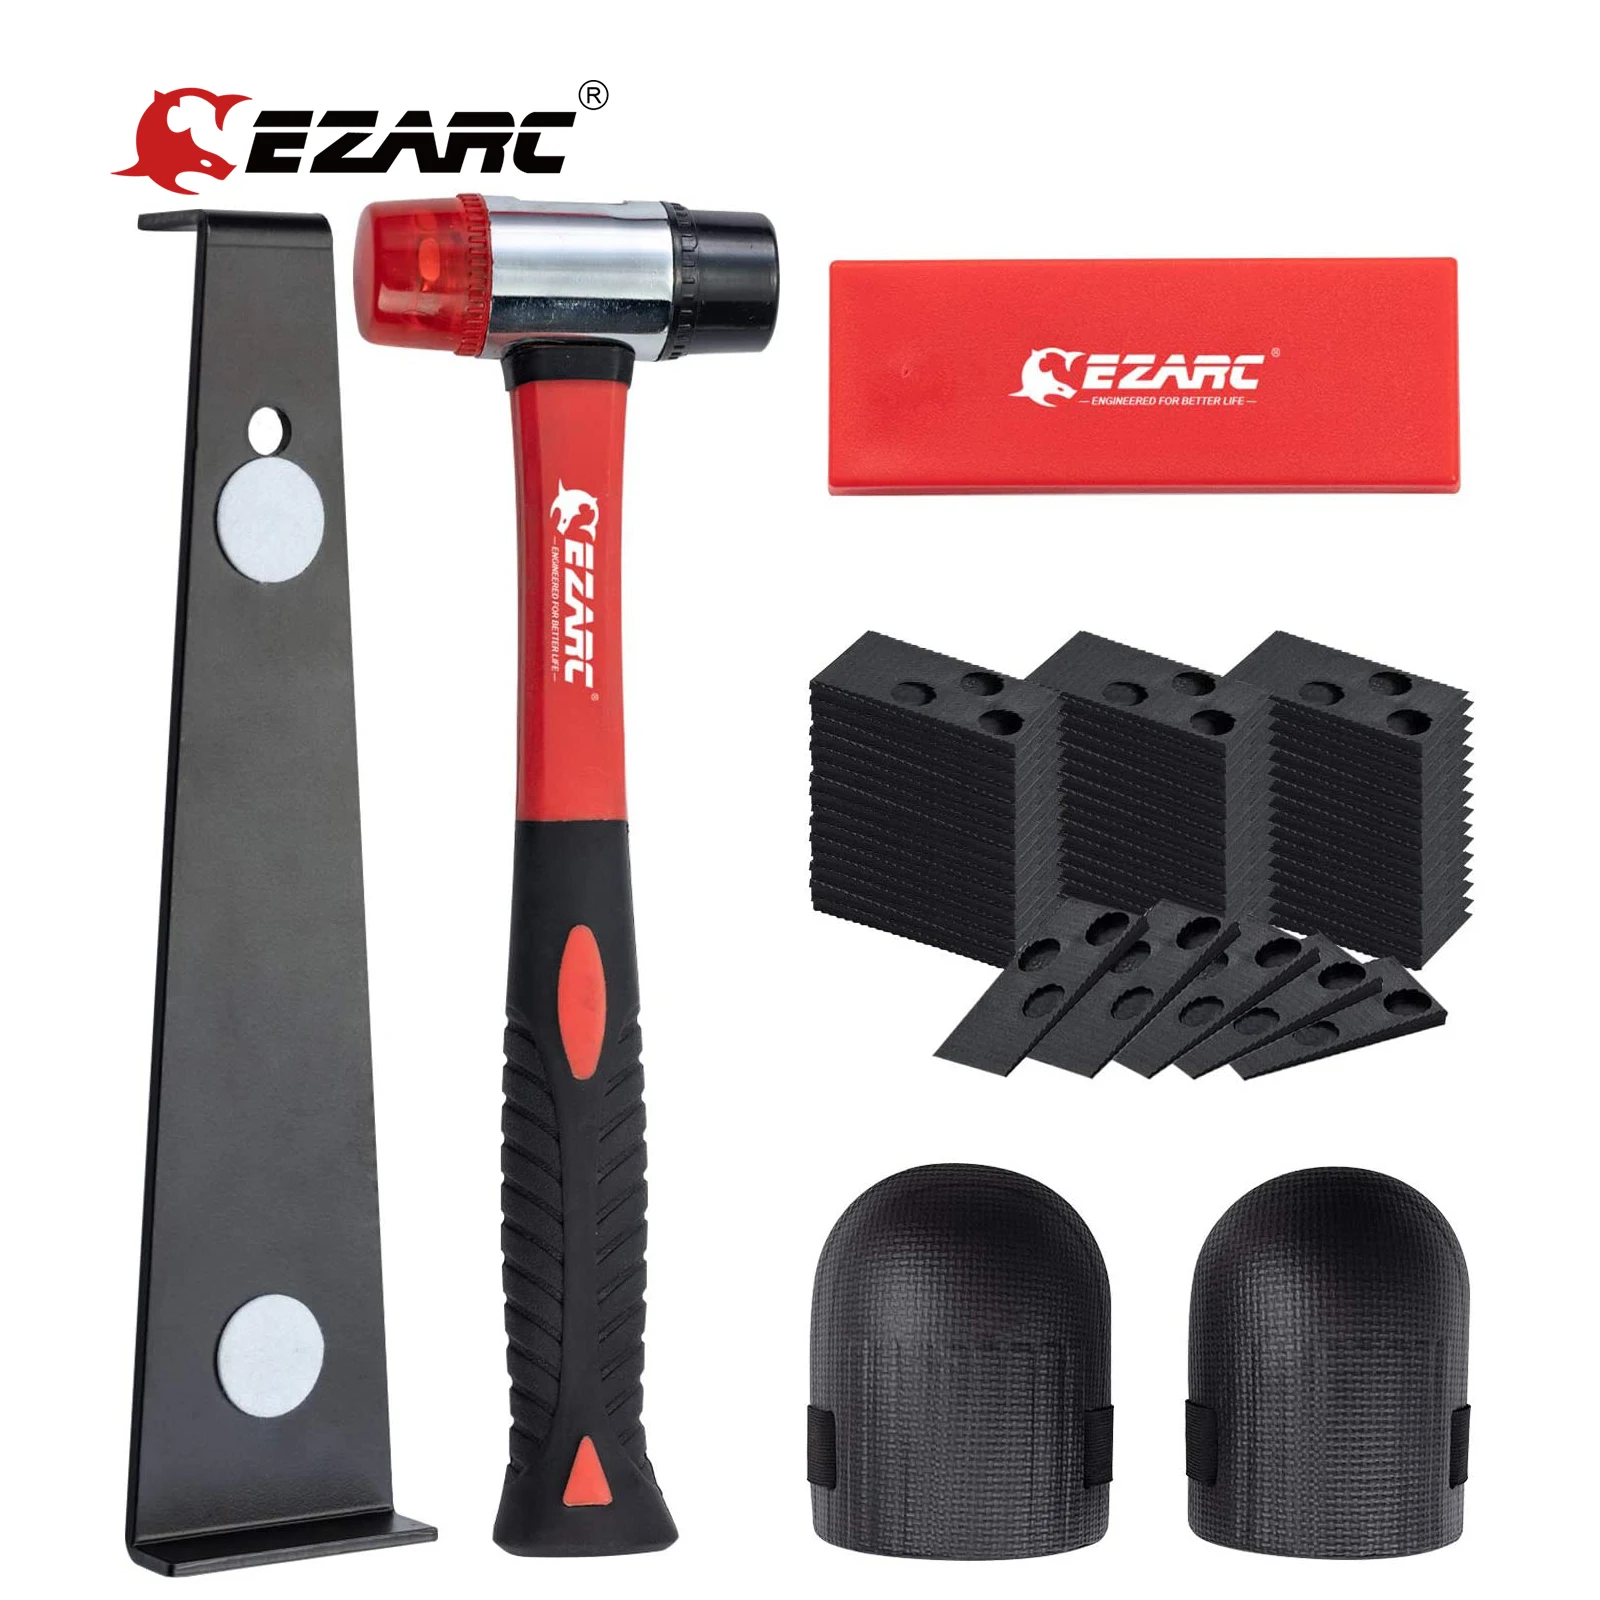 EZARC Laminate Wood Flooring Installation Kit with 60 Spacers,Pull Bar, Rubber Tapping Block, Double-Faced Mallet, Foam Kneepads xuqian hot sale with metal stamping hammer and steel bench block for personalizing jewelry wood leather and more l0157